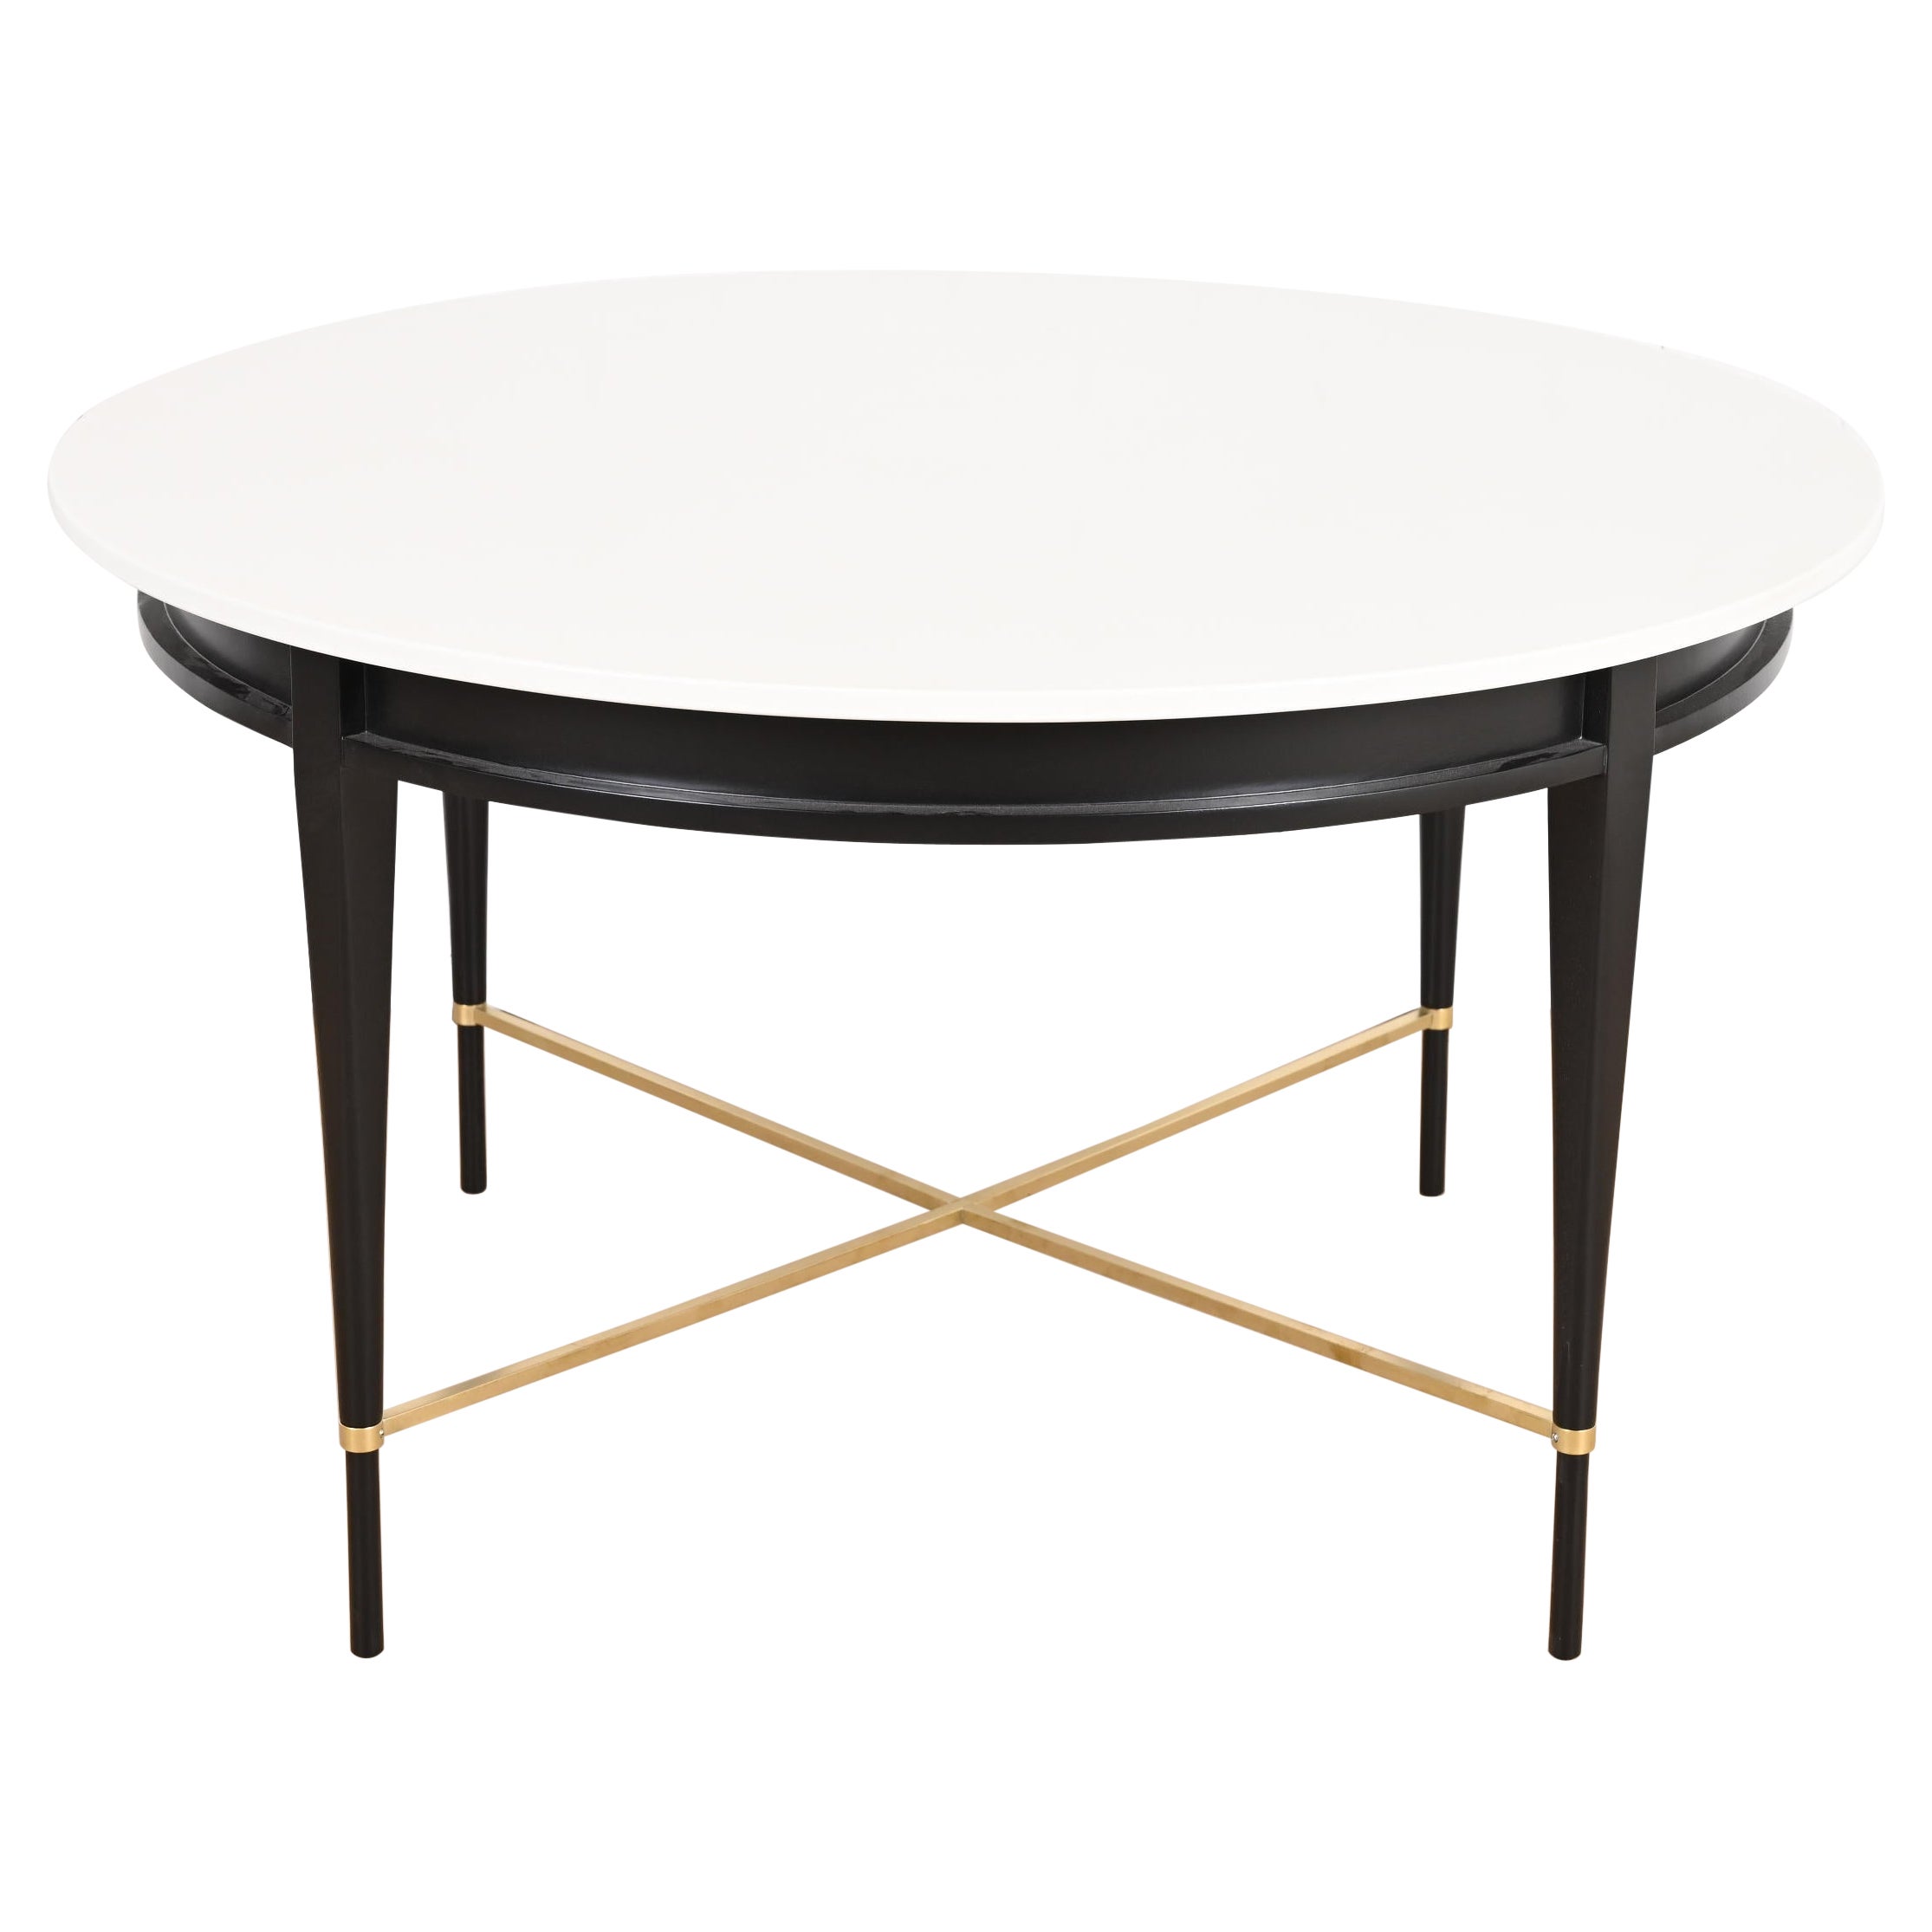 Paul McCobb Irwin Collection Black Lacquer and Brass Dining Table, Refinished For Sale